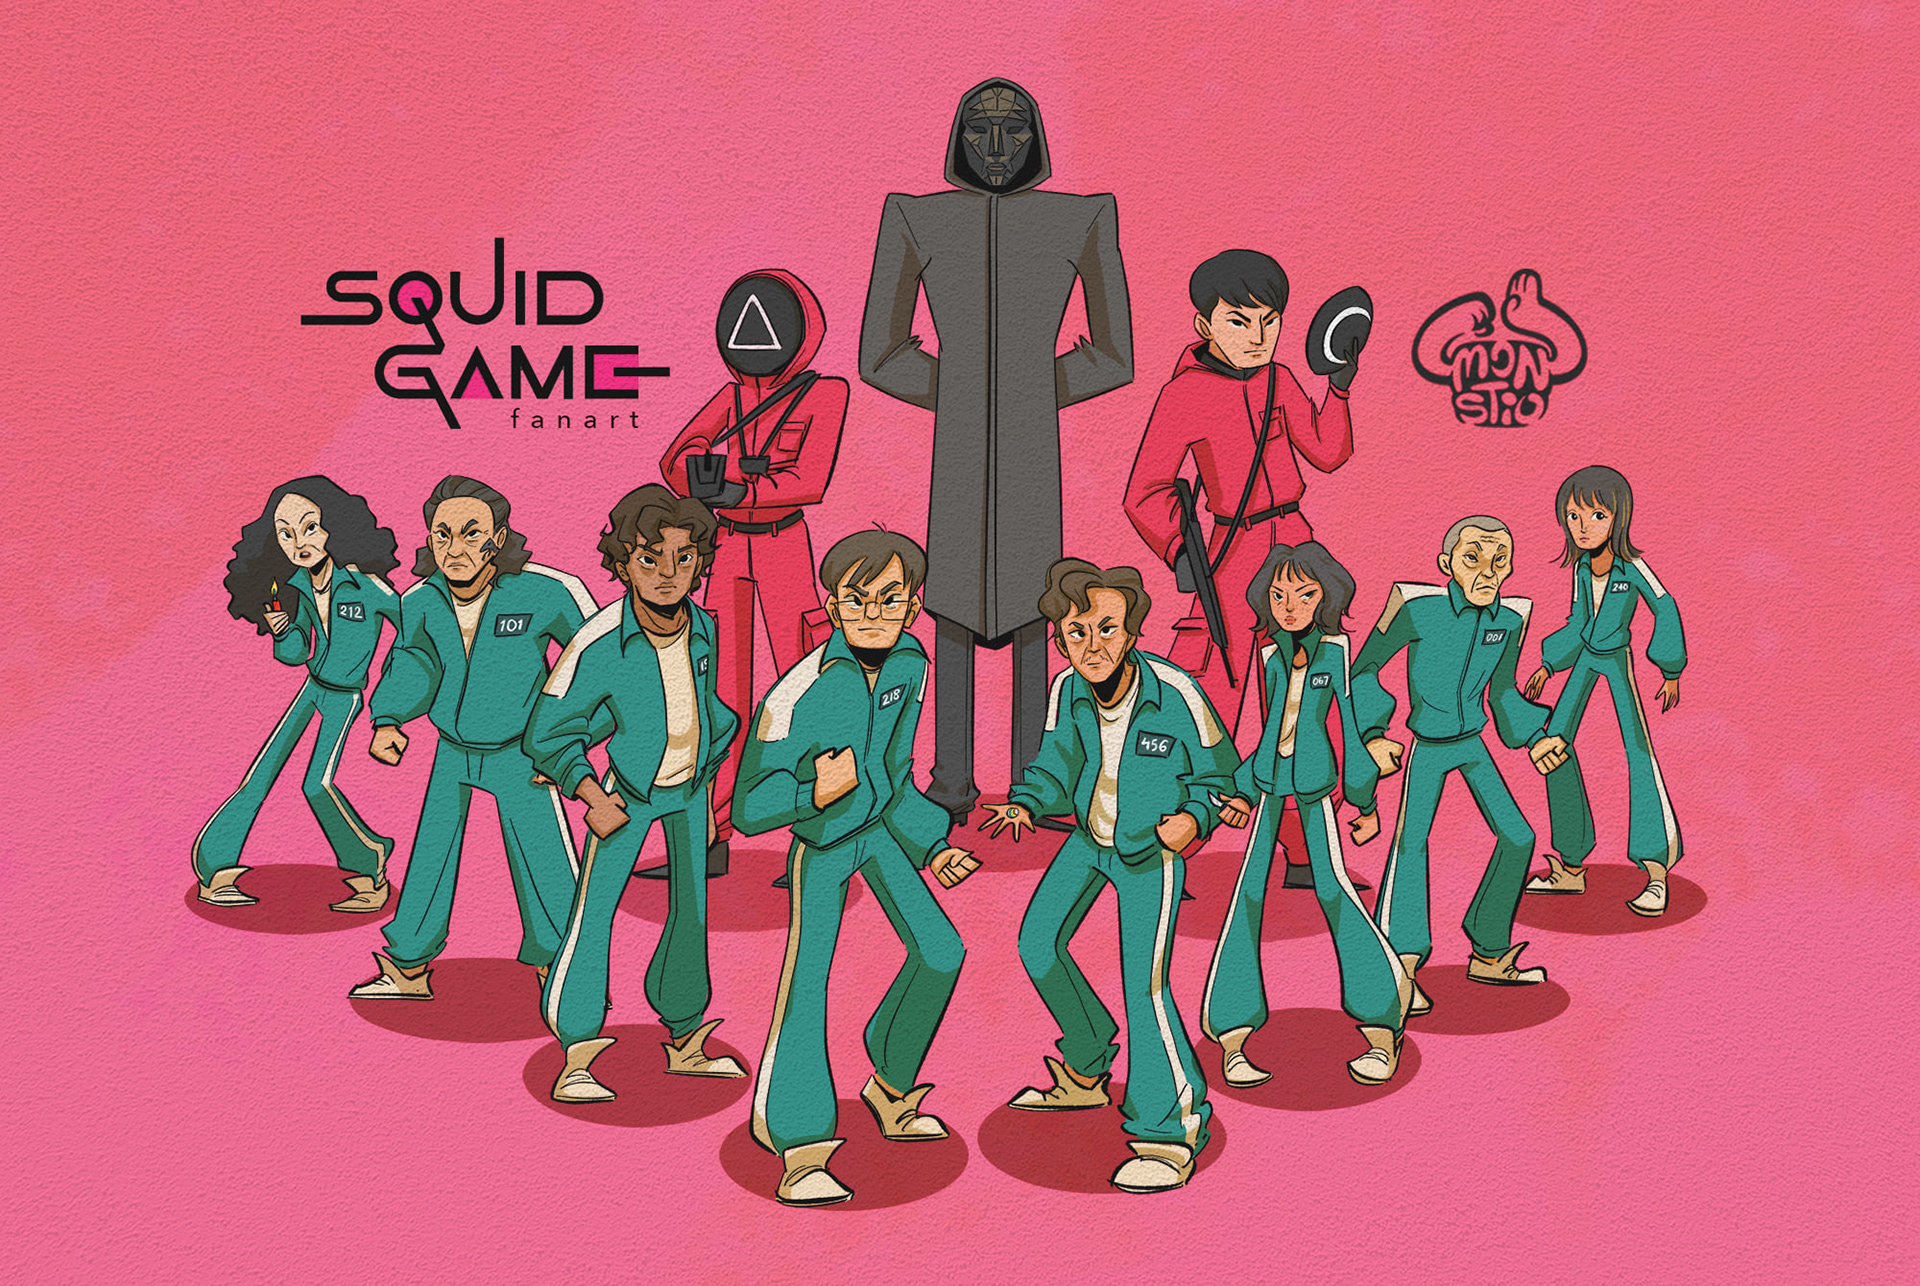 Squid Game Fan Art Collection Daily design inspiration for creatives